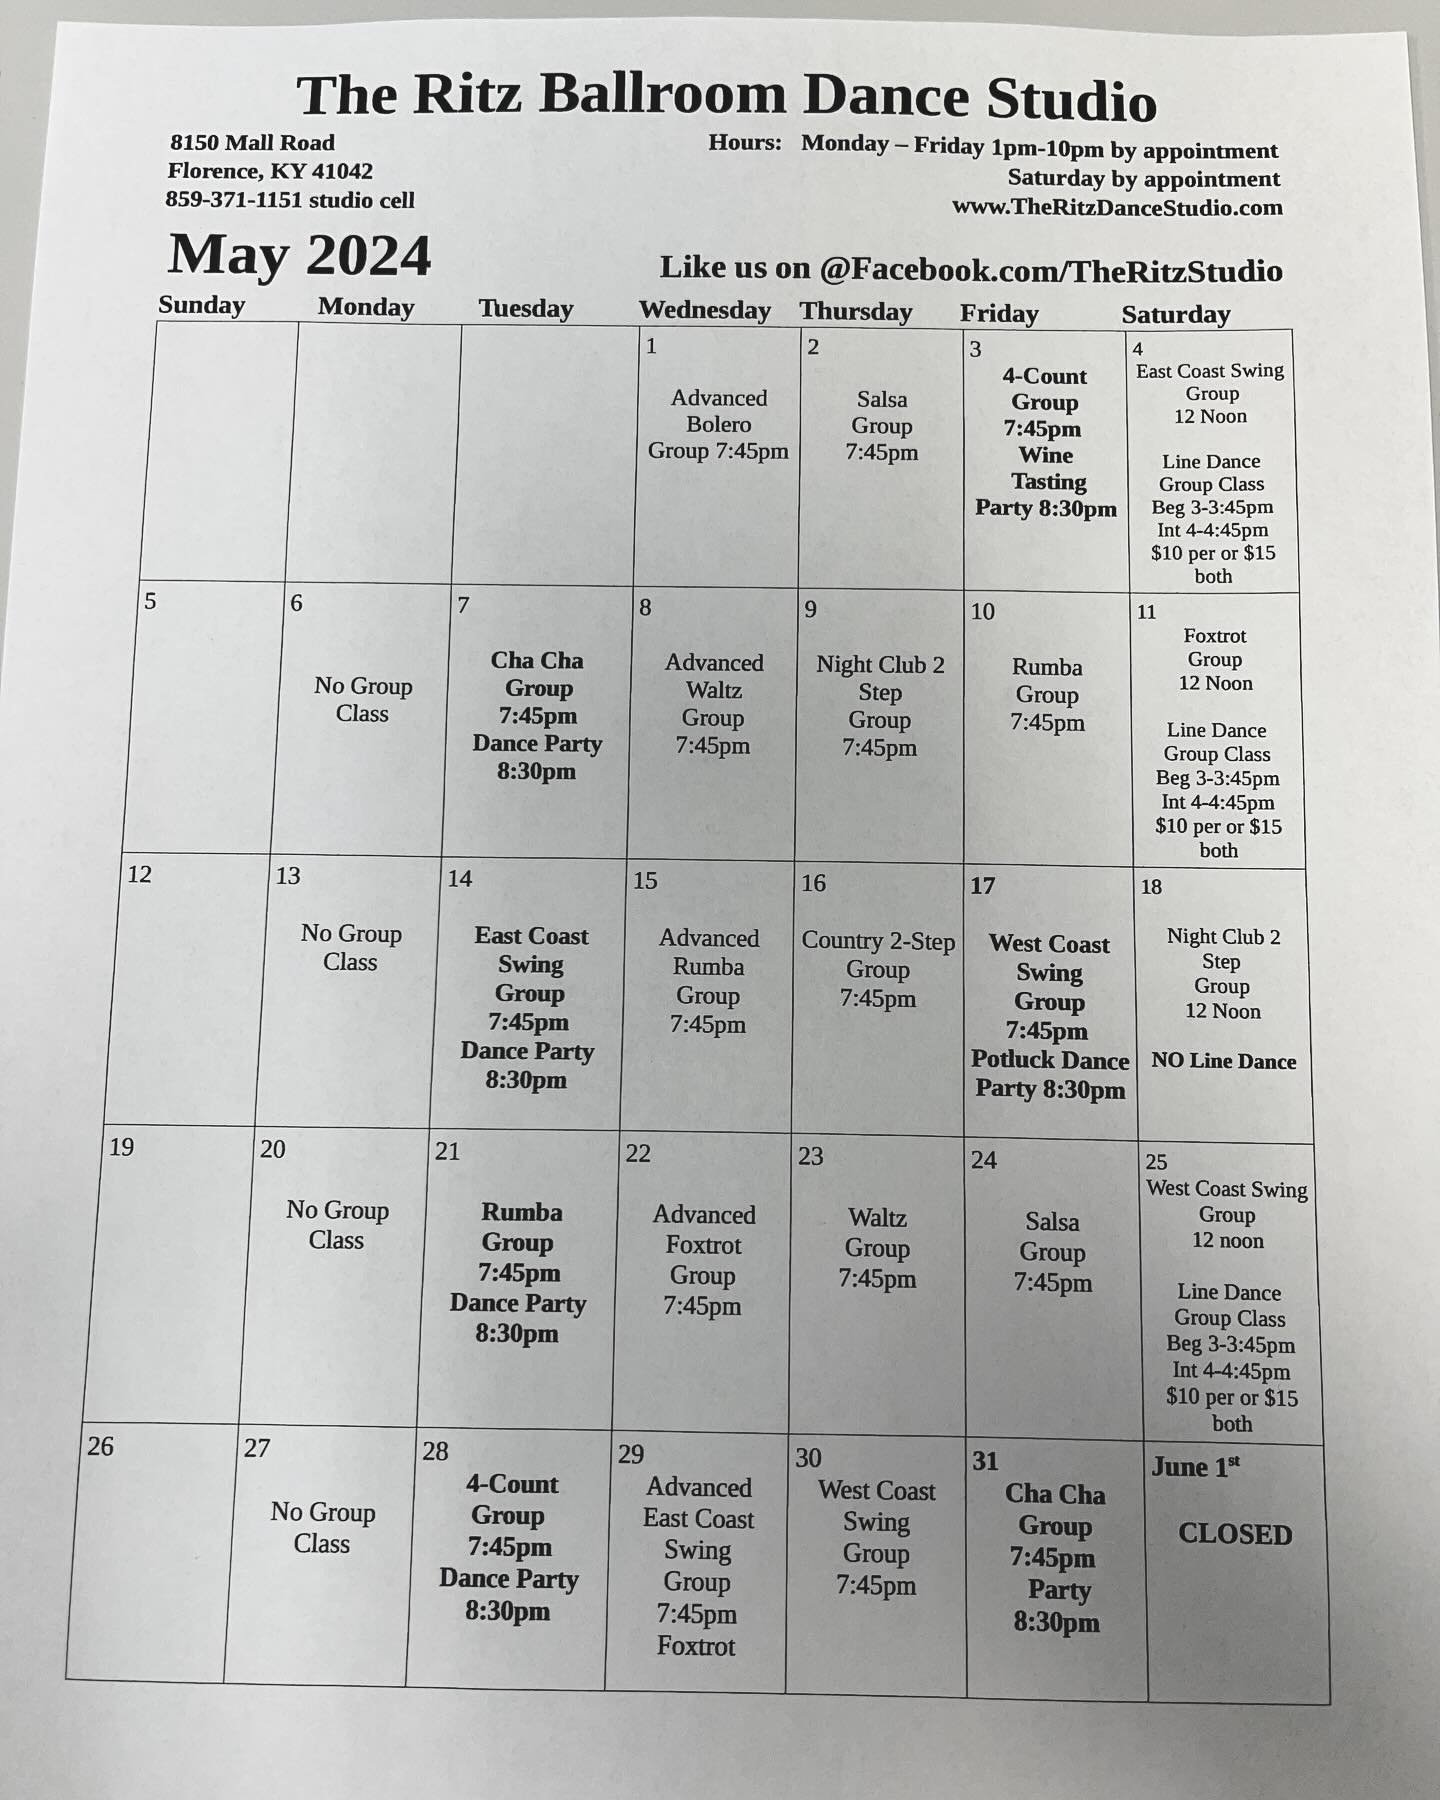 May Calendar! 🌻🪻🌹🌷 Join us this month for some fun parties and group classes! Please note there are some Saturday class cancellations and schedule changes! Thank you for understanding 😊